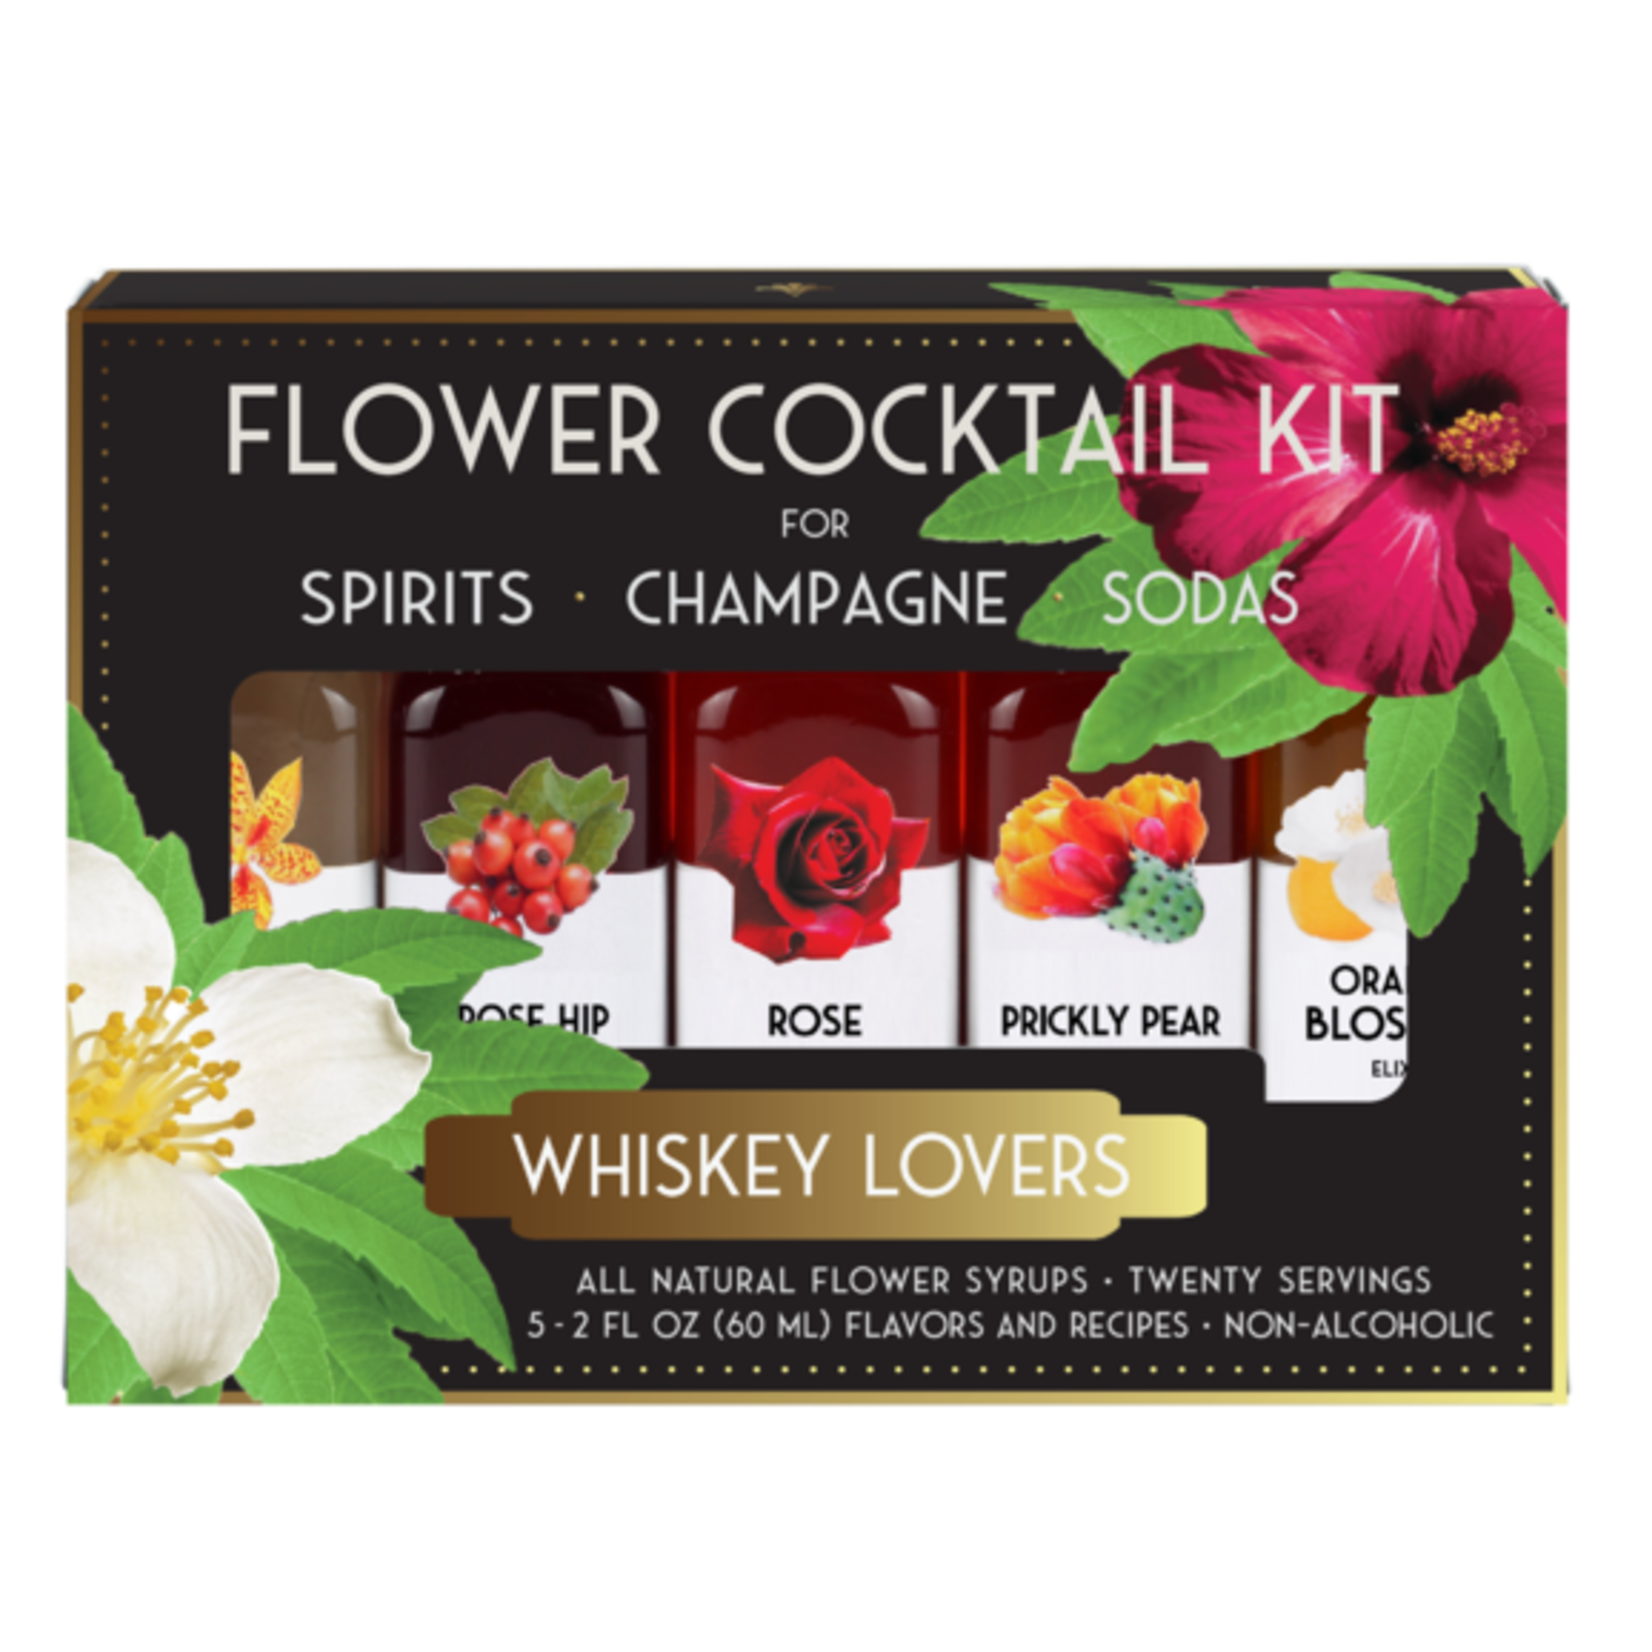 Floral Elixir Company Whiskey Lovers Cocktail Kit